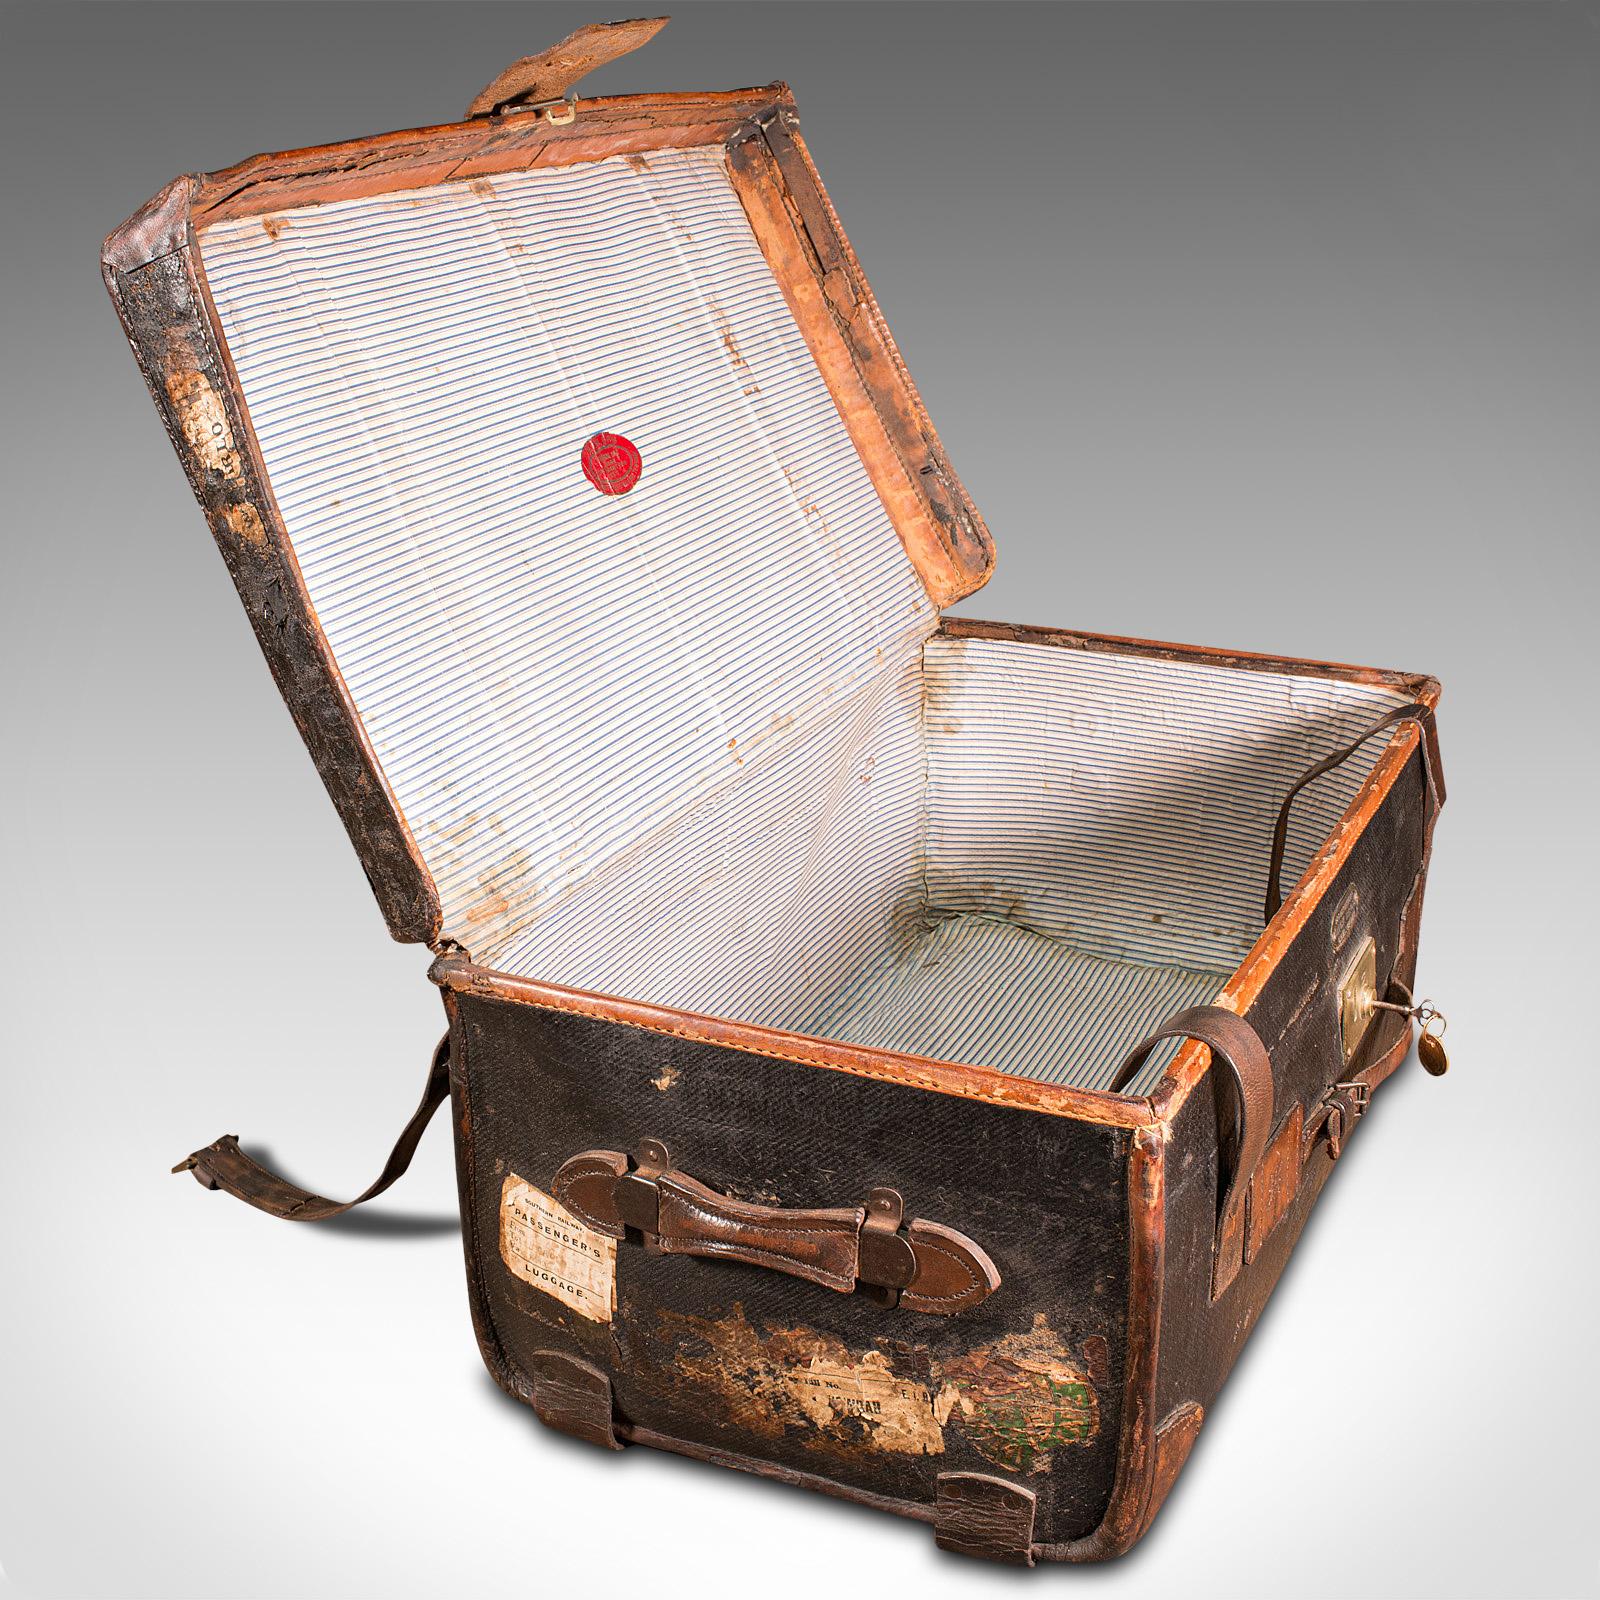 20th Century Vintage Overseas Voyage Trunk, English, Leather, Travel Case, Luggage, C.1930 For Sale